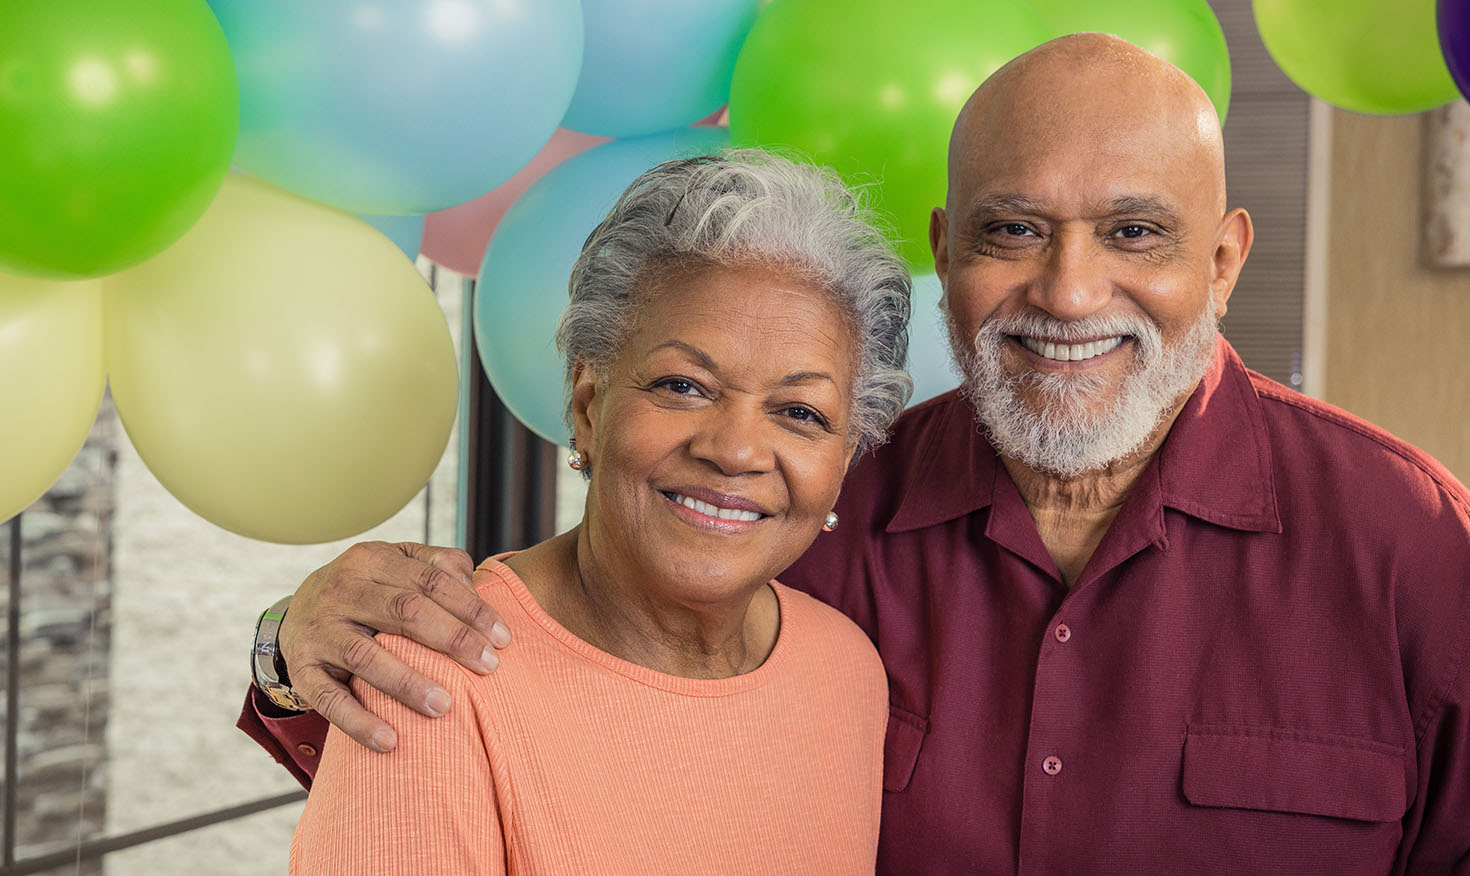 Smiling senior man with his arm around a senior woman standing in front of balloons